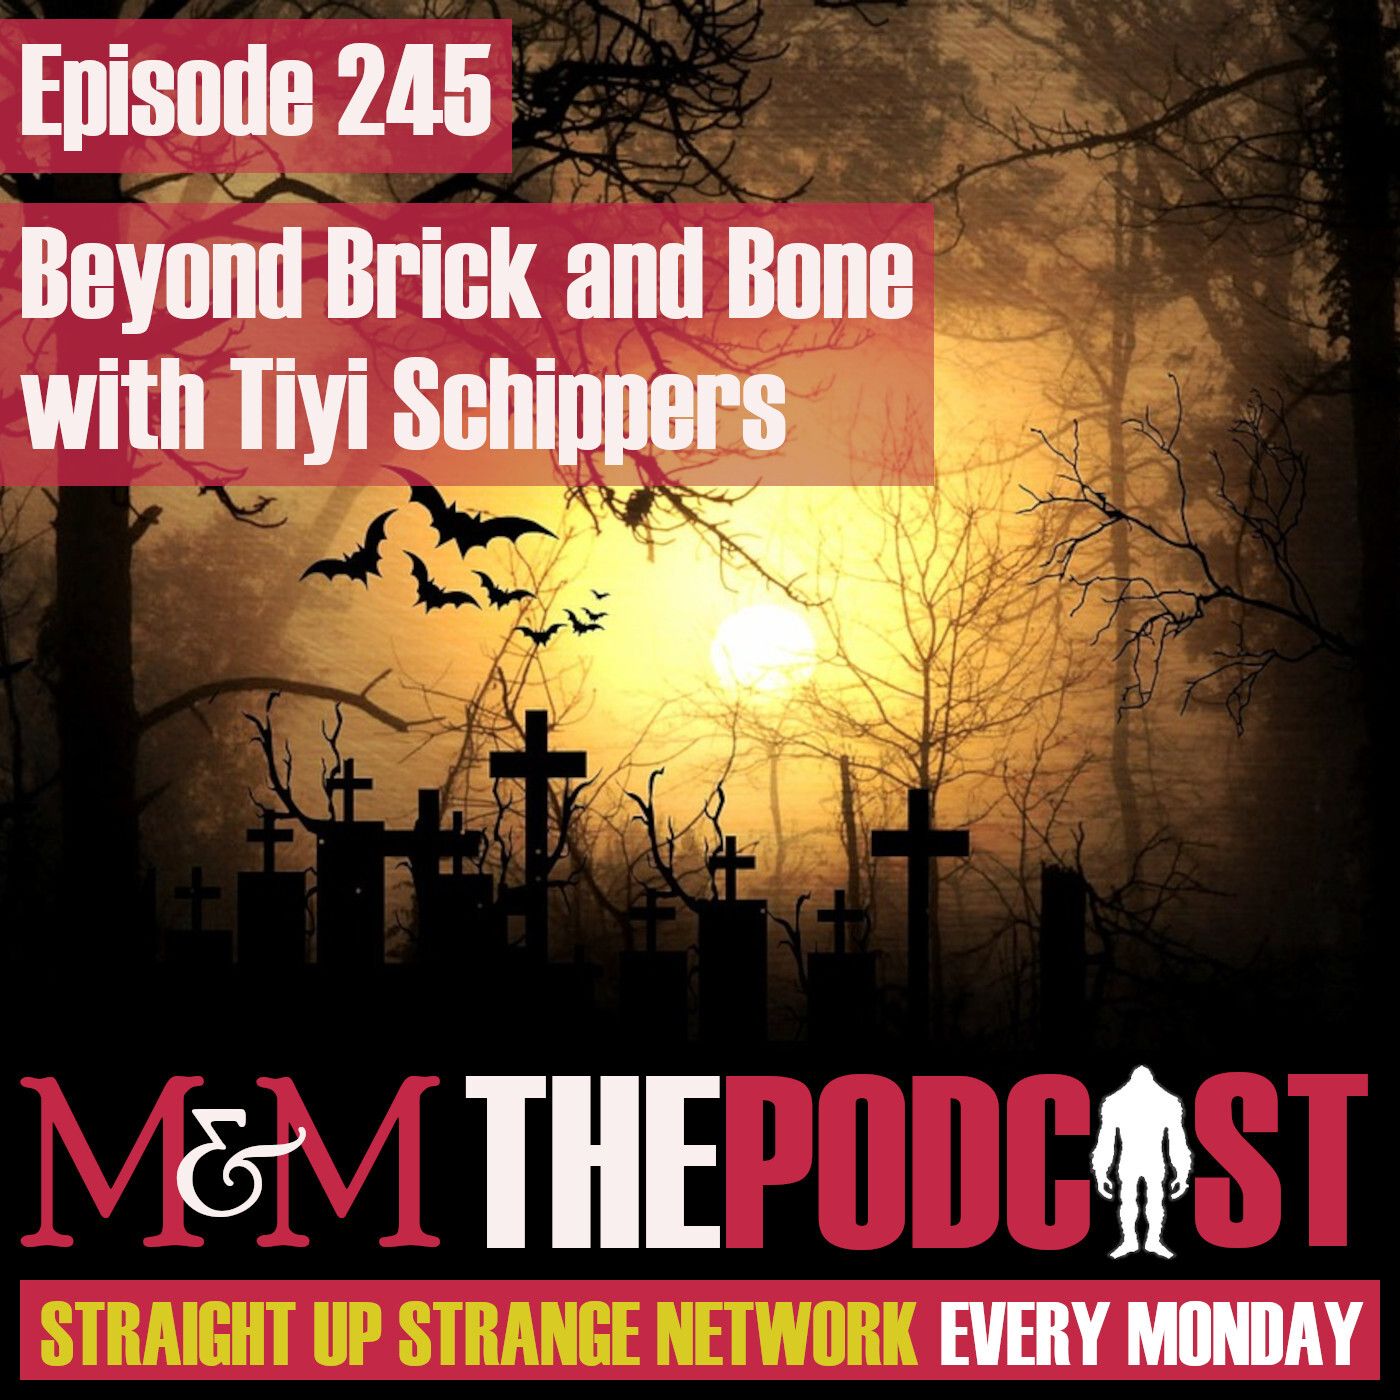 Mysteries and Monsters: Episode 245 Beyond Brick and Bone with Tiyi Schippers